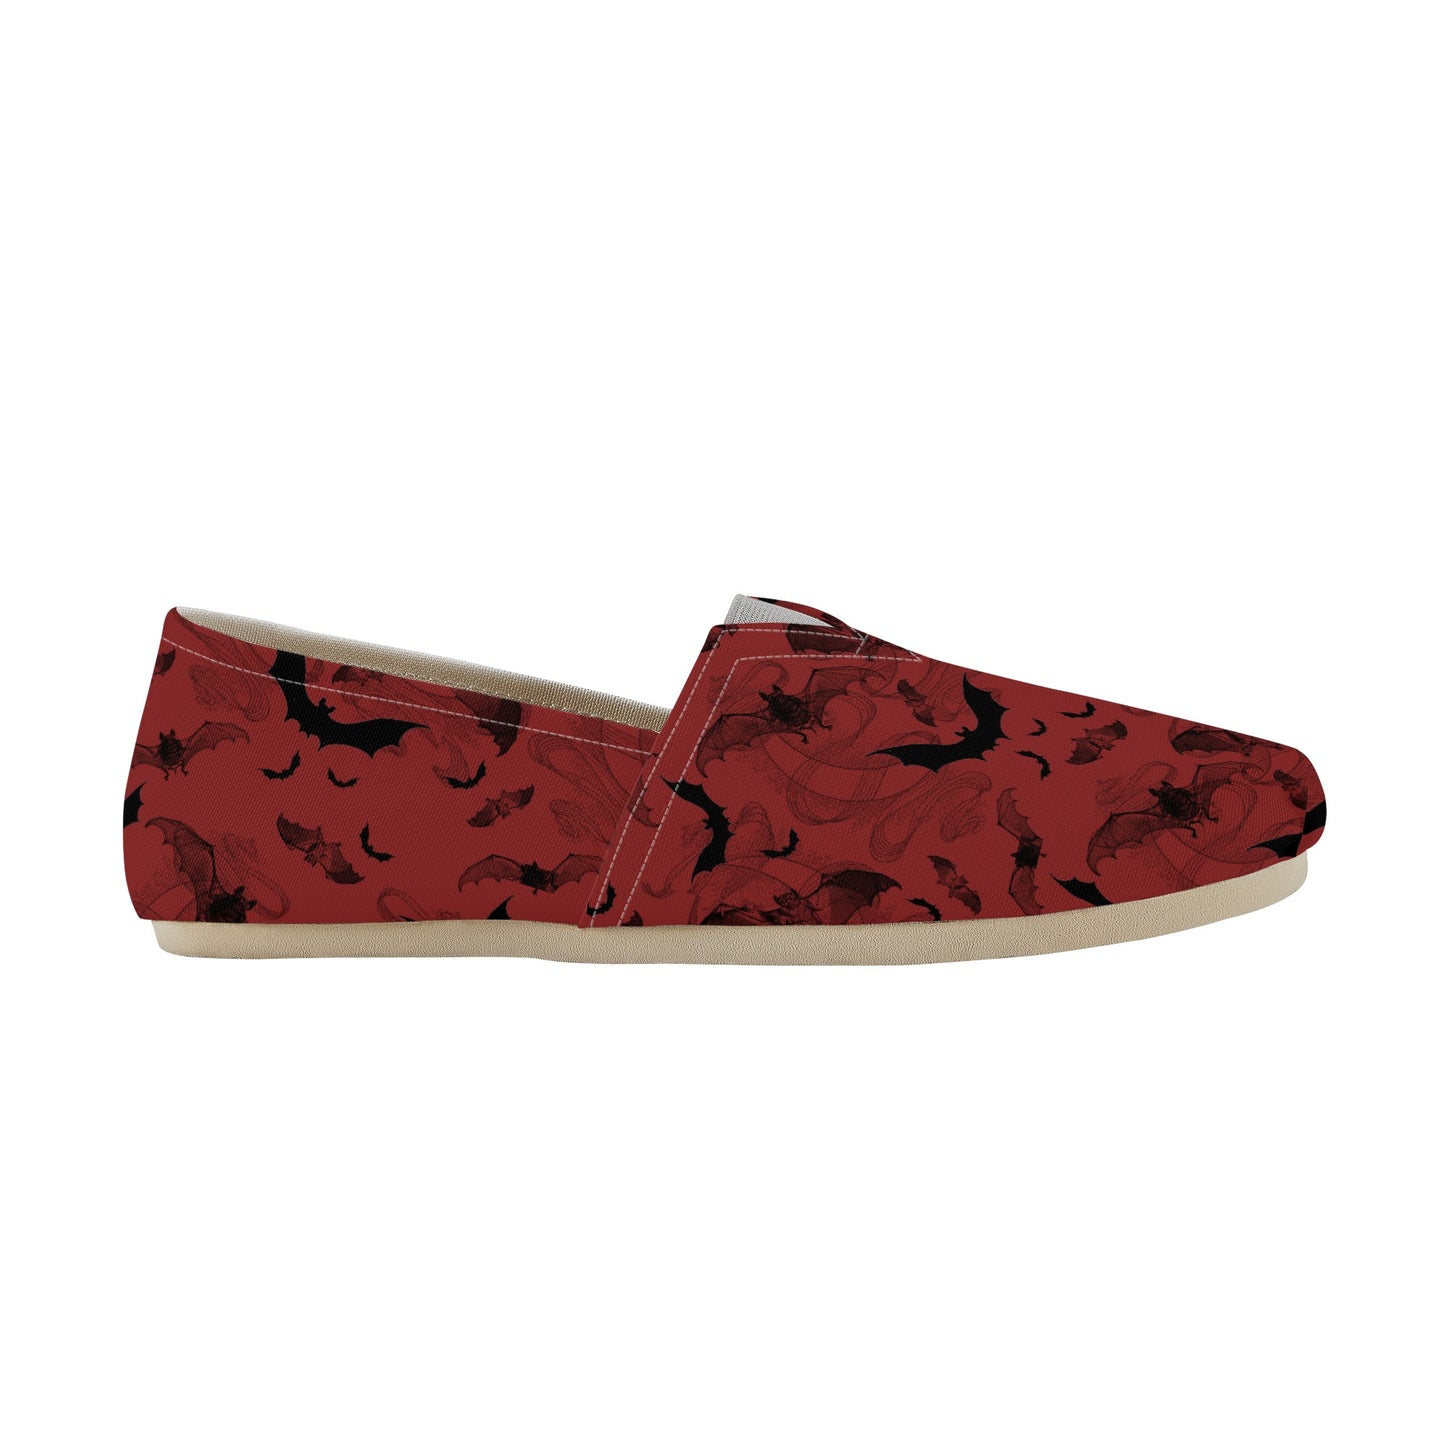 Bats Design Red Casual Shoes